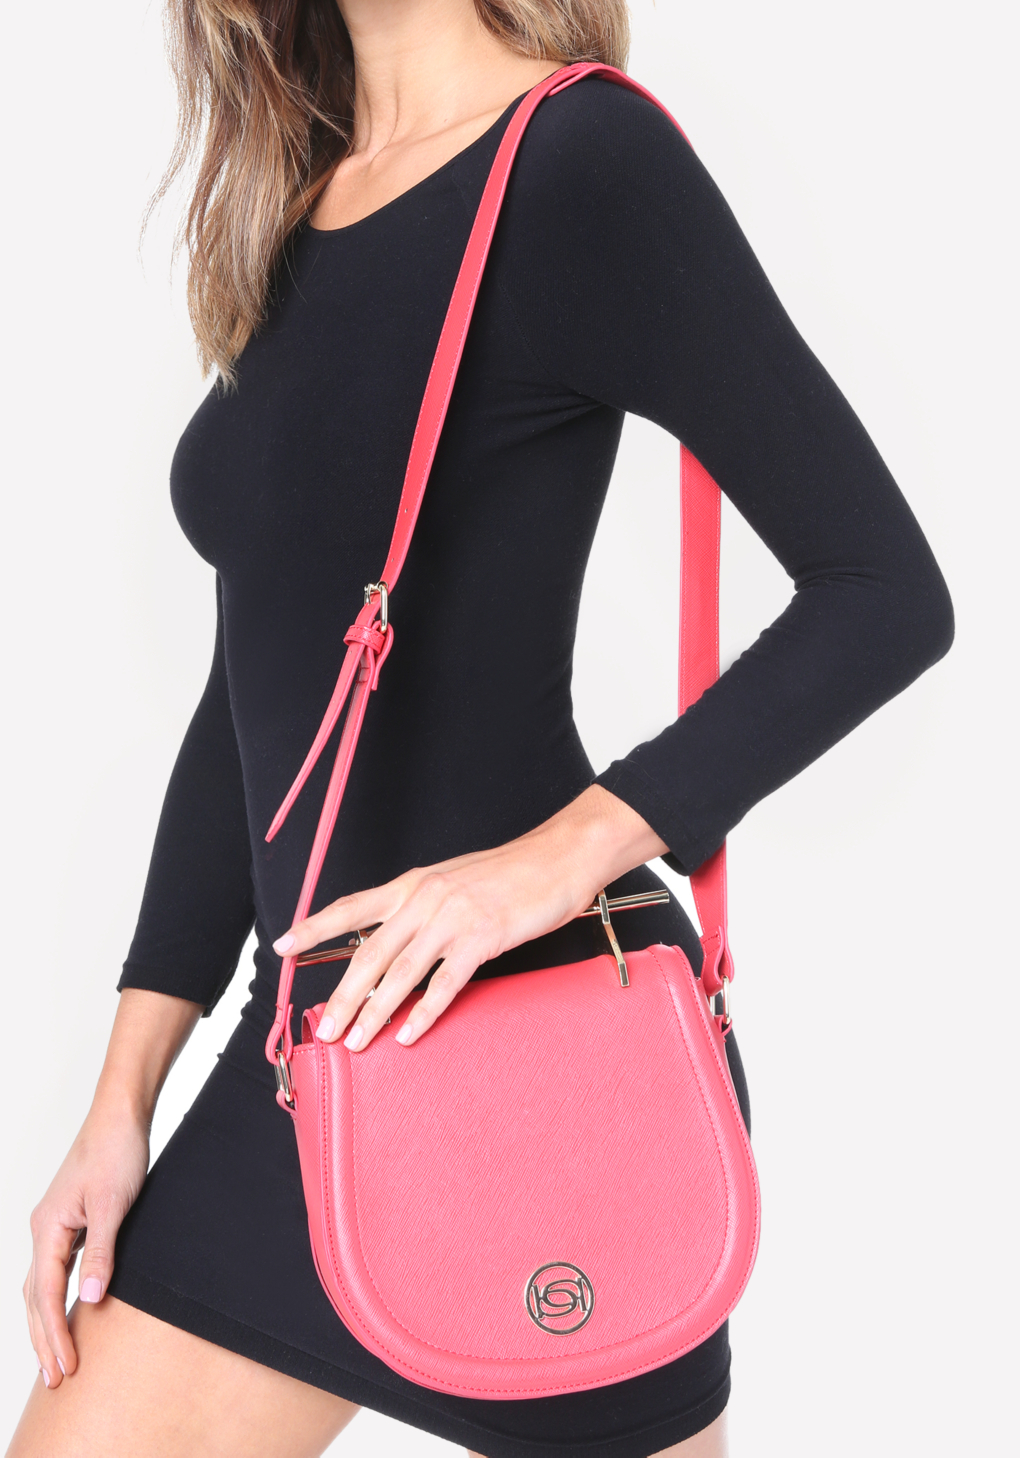 Lyst - Bebe Lily Crossbody Saddle Bag in Pink